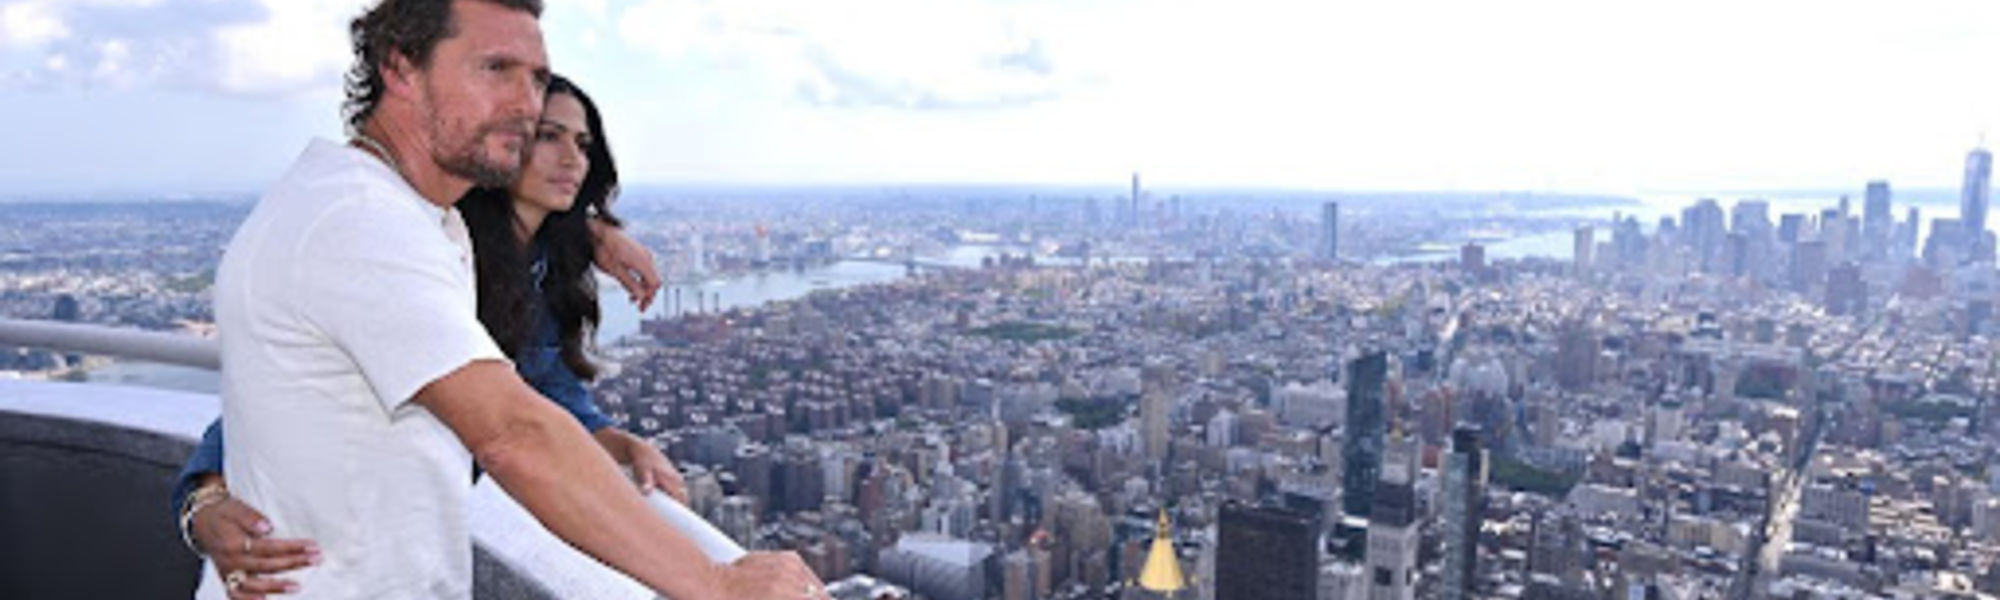 Matthew McConaughey and his wife atop ESB